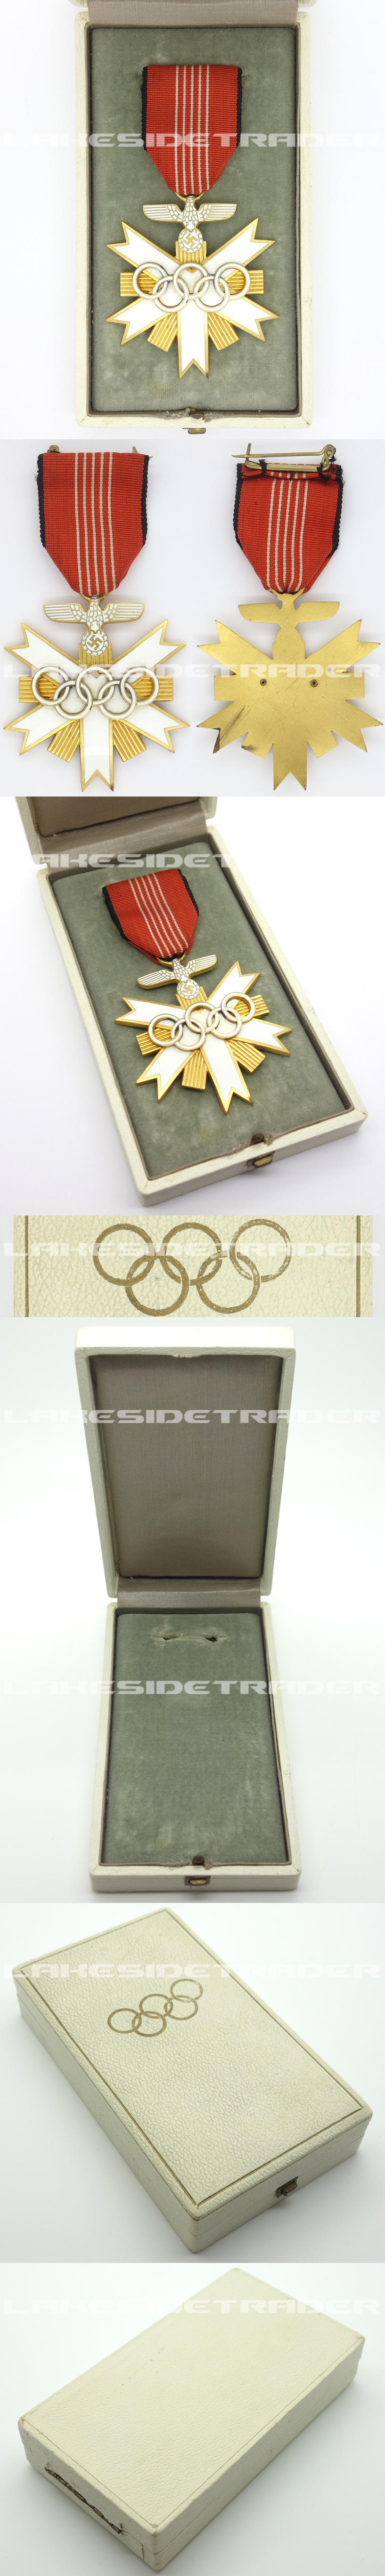 Cased 2nd Class Olympic Decoration 1936